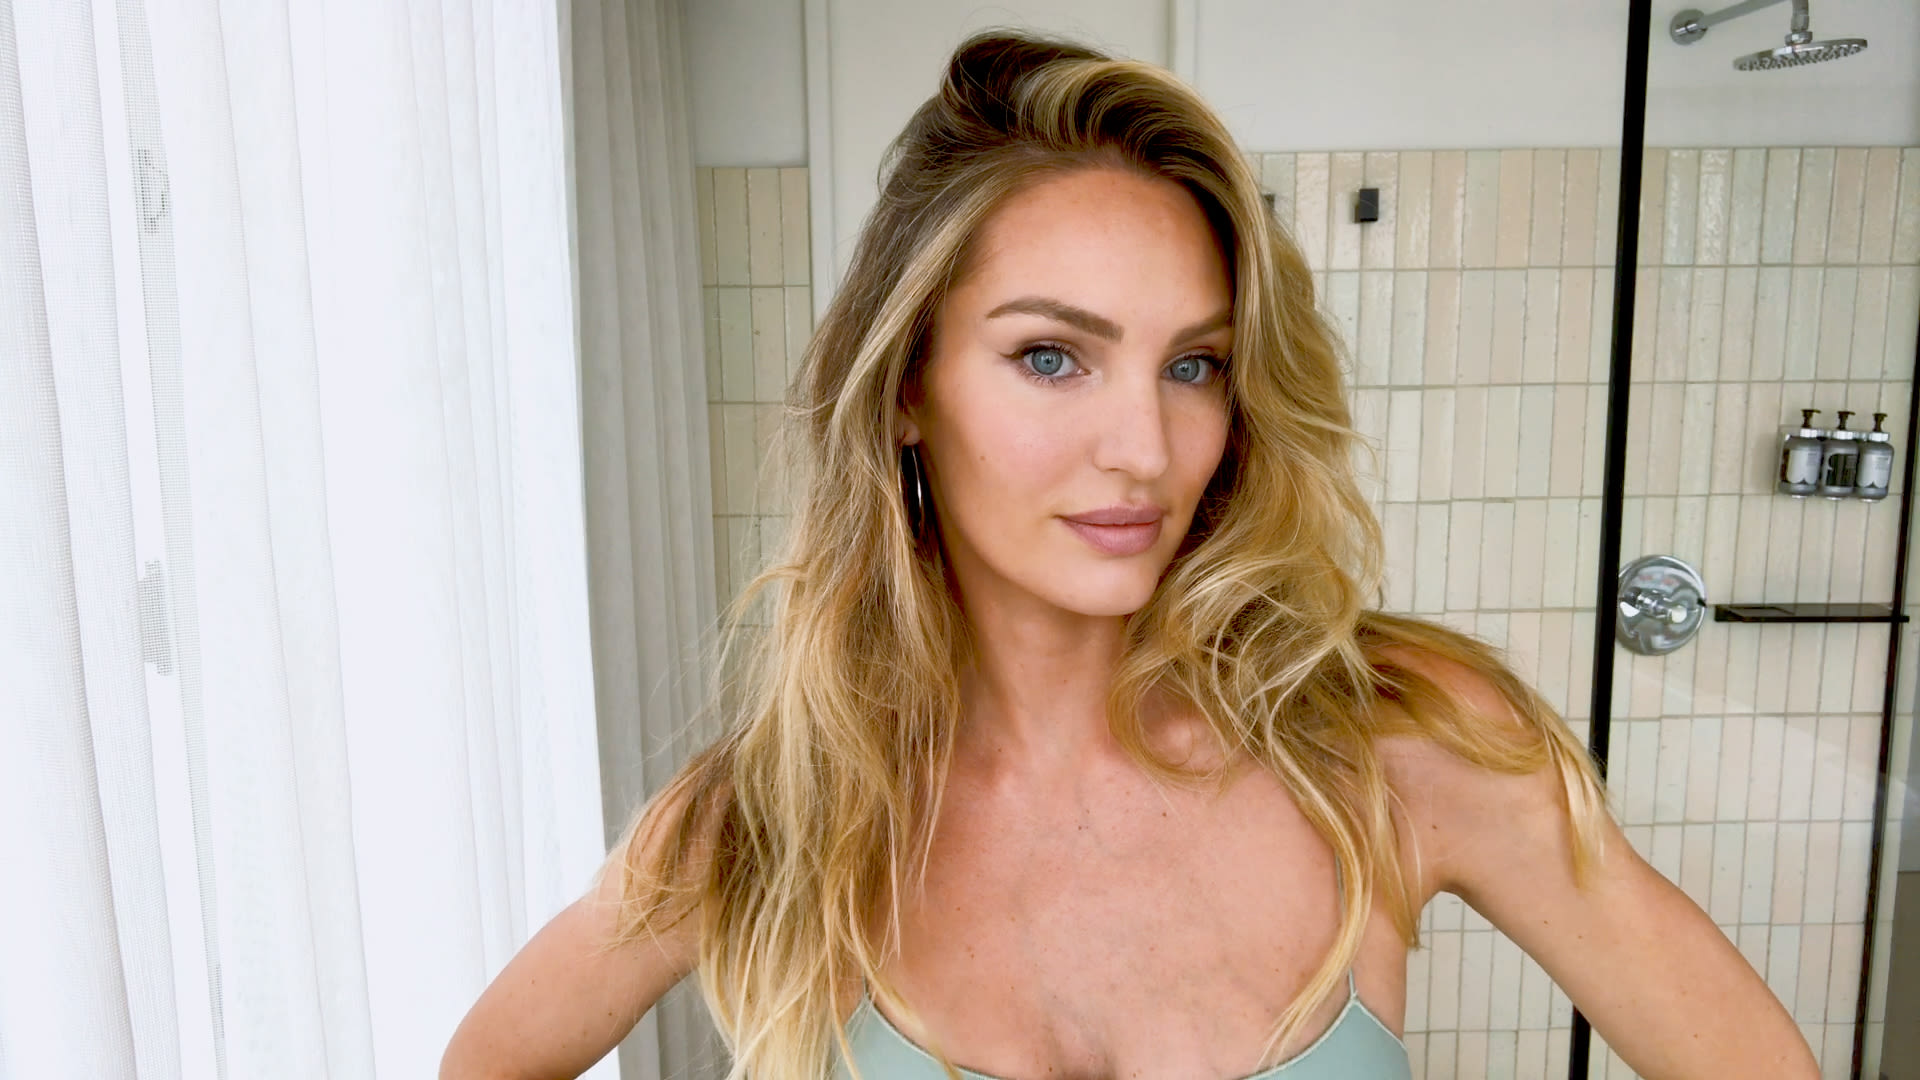 Watch Watch Candice Swanepoels 10-Minute Guide to Adult Pic Hq